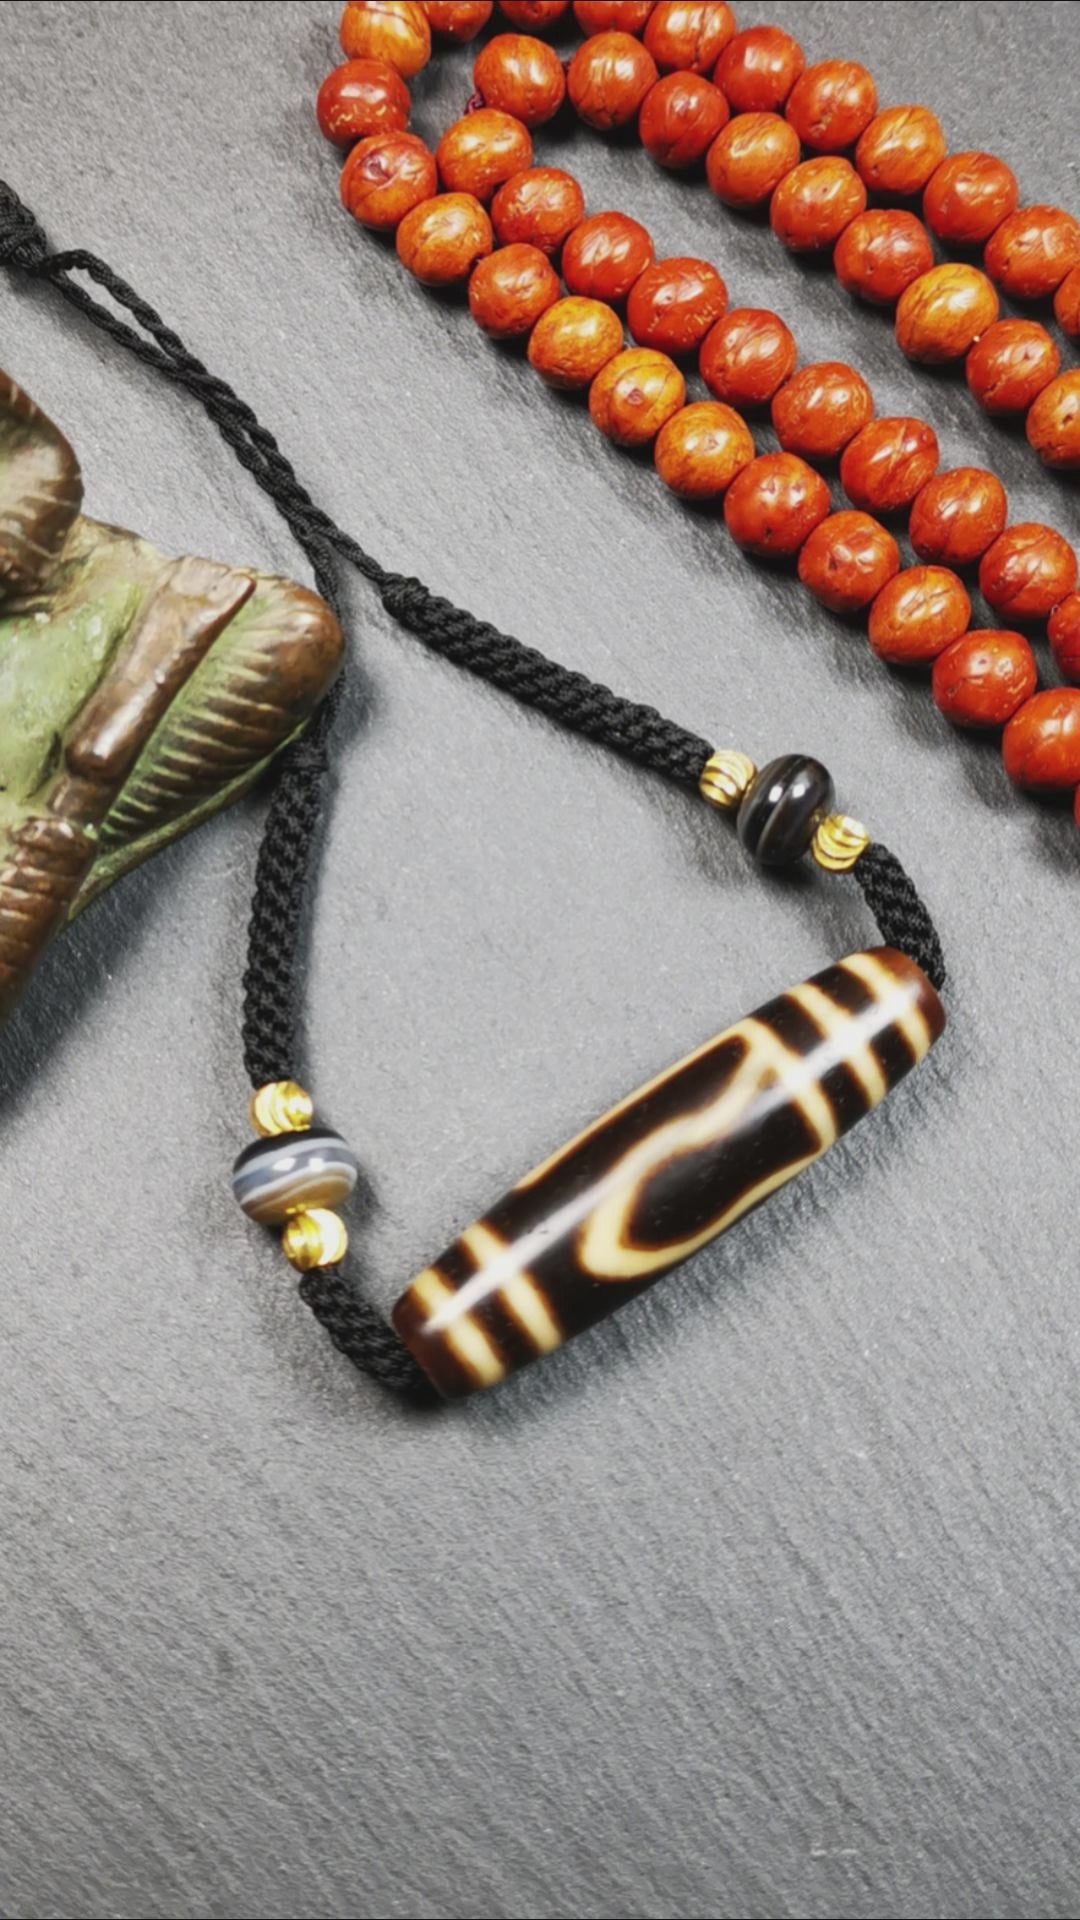 This necklace was hand-woven by Tibetans from Baiyu County, the main bead is a mountain eye dzi bead, paired with 2 small stripe dzi beads,about 30 years old. It can be worn not only as a fashionable accessory but also holds cultural and religious significance.